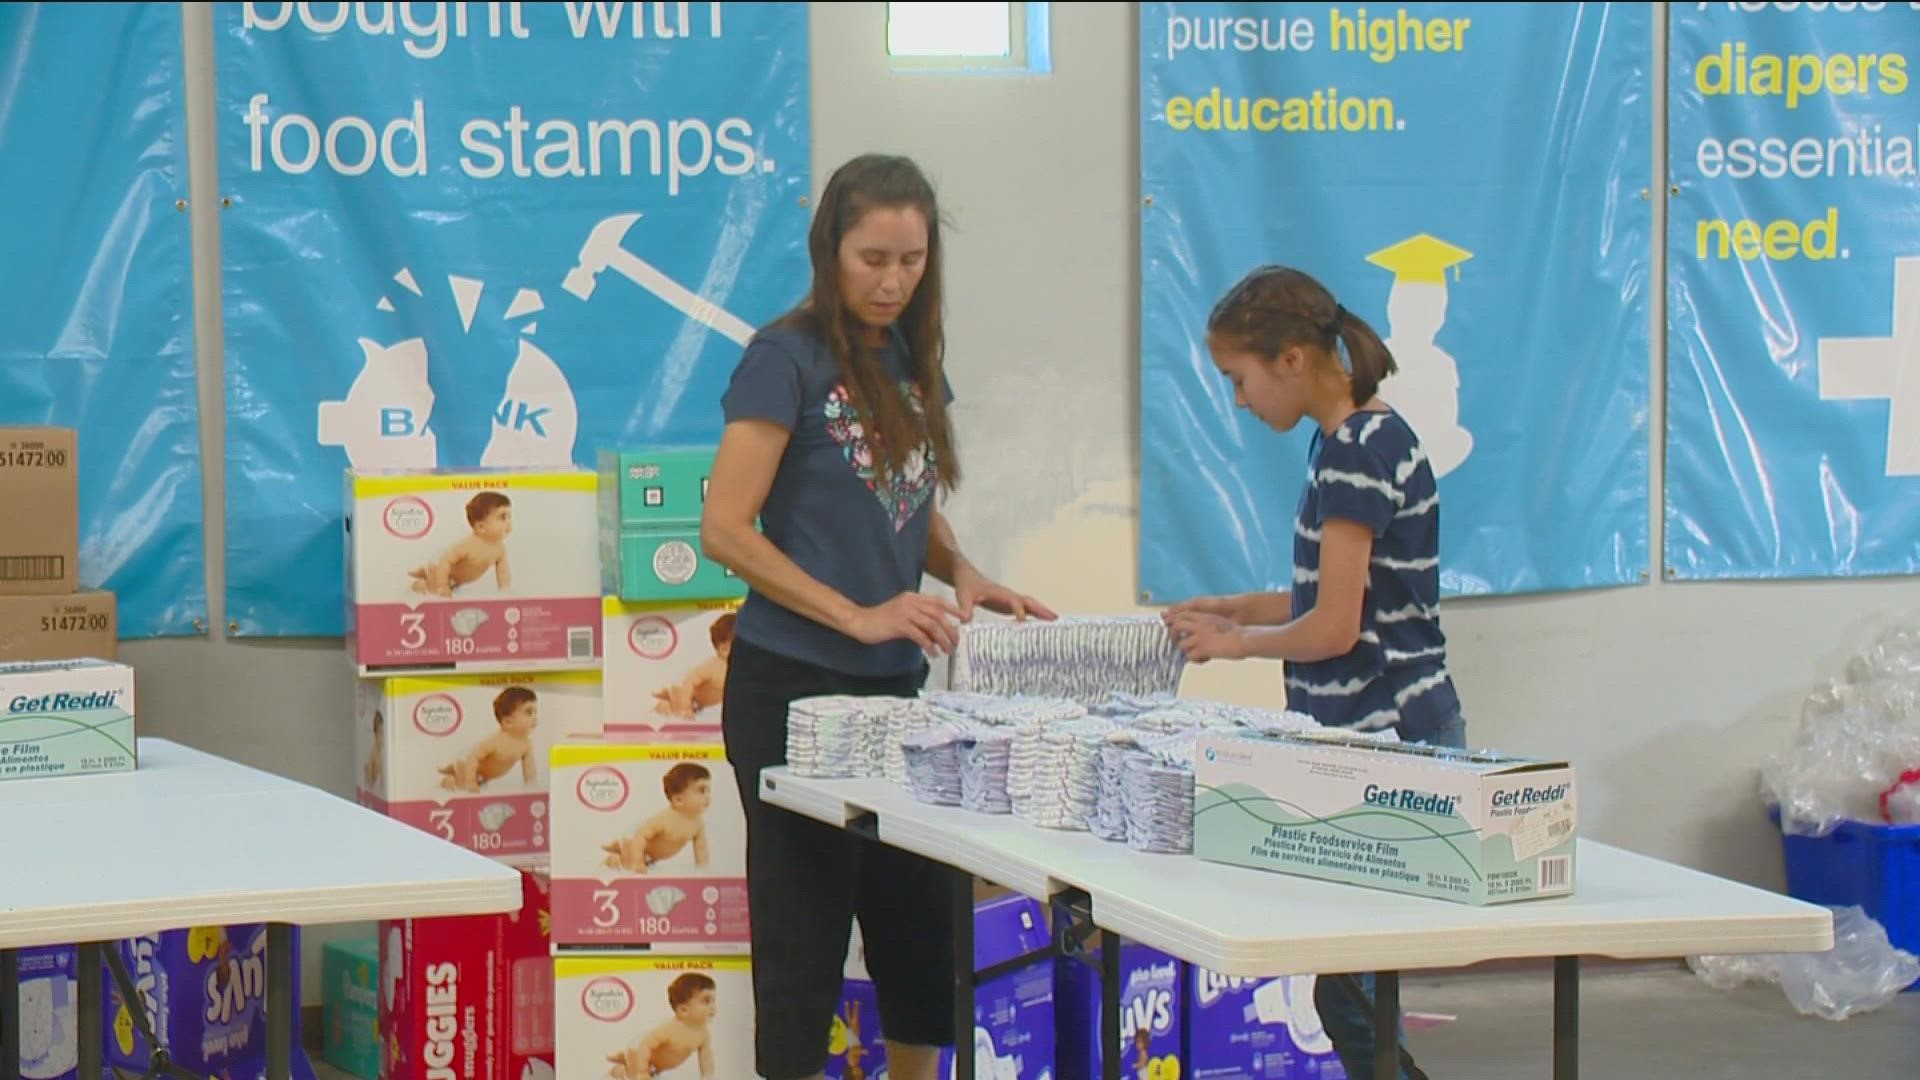 The diaper bank gave out 65,000 diapers in August, which is a 10,000 increase over July.